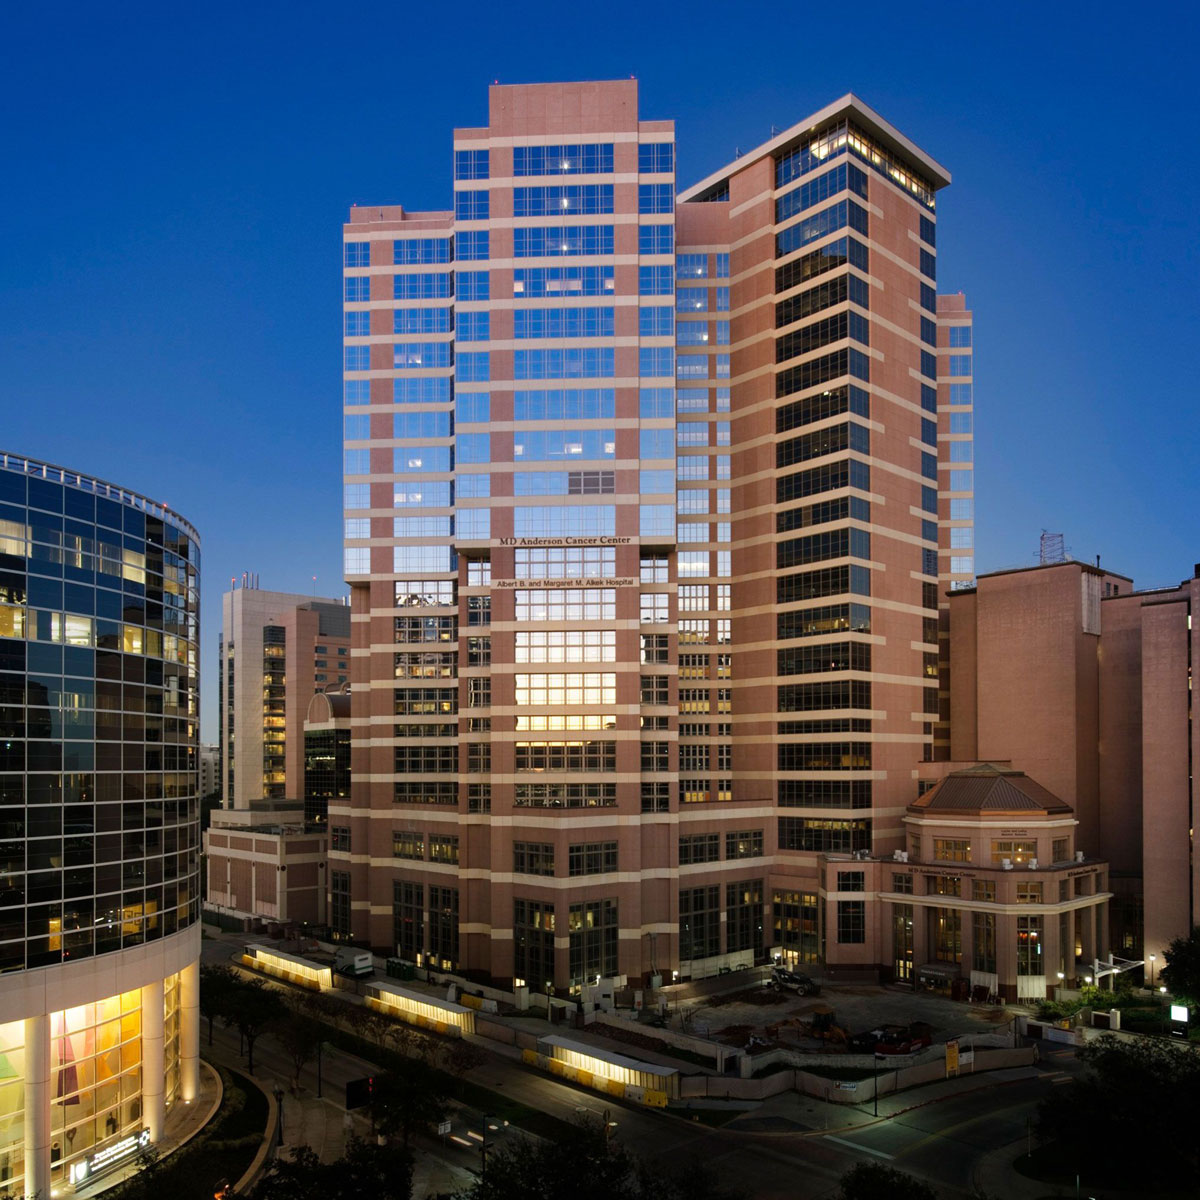 MD Anderson Cancer Center Vertical Expansion Project